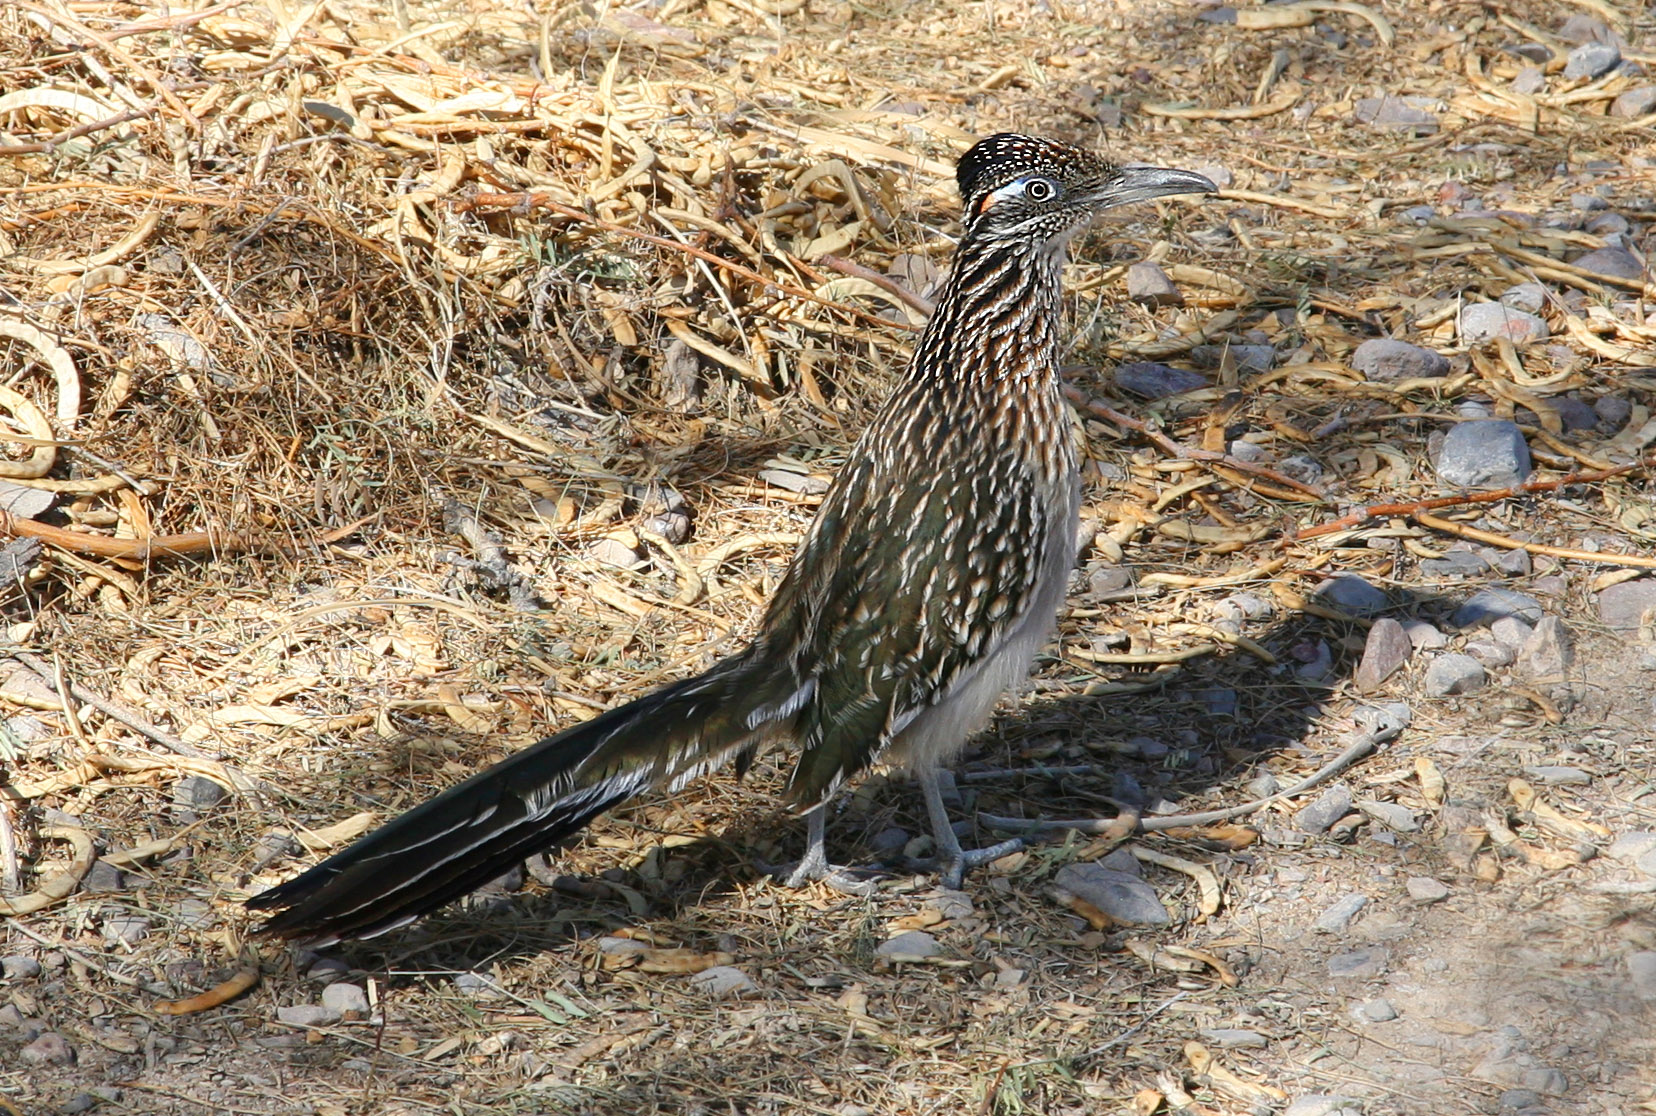 a bird that is standing on some kind of dirt